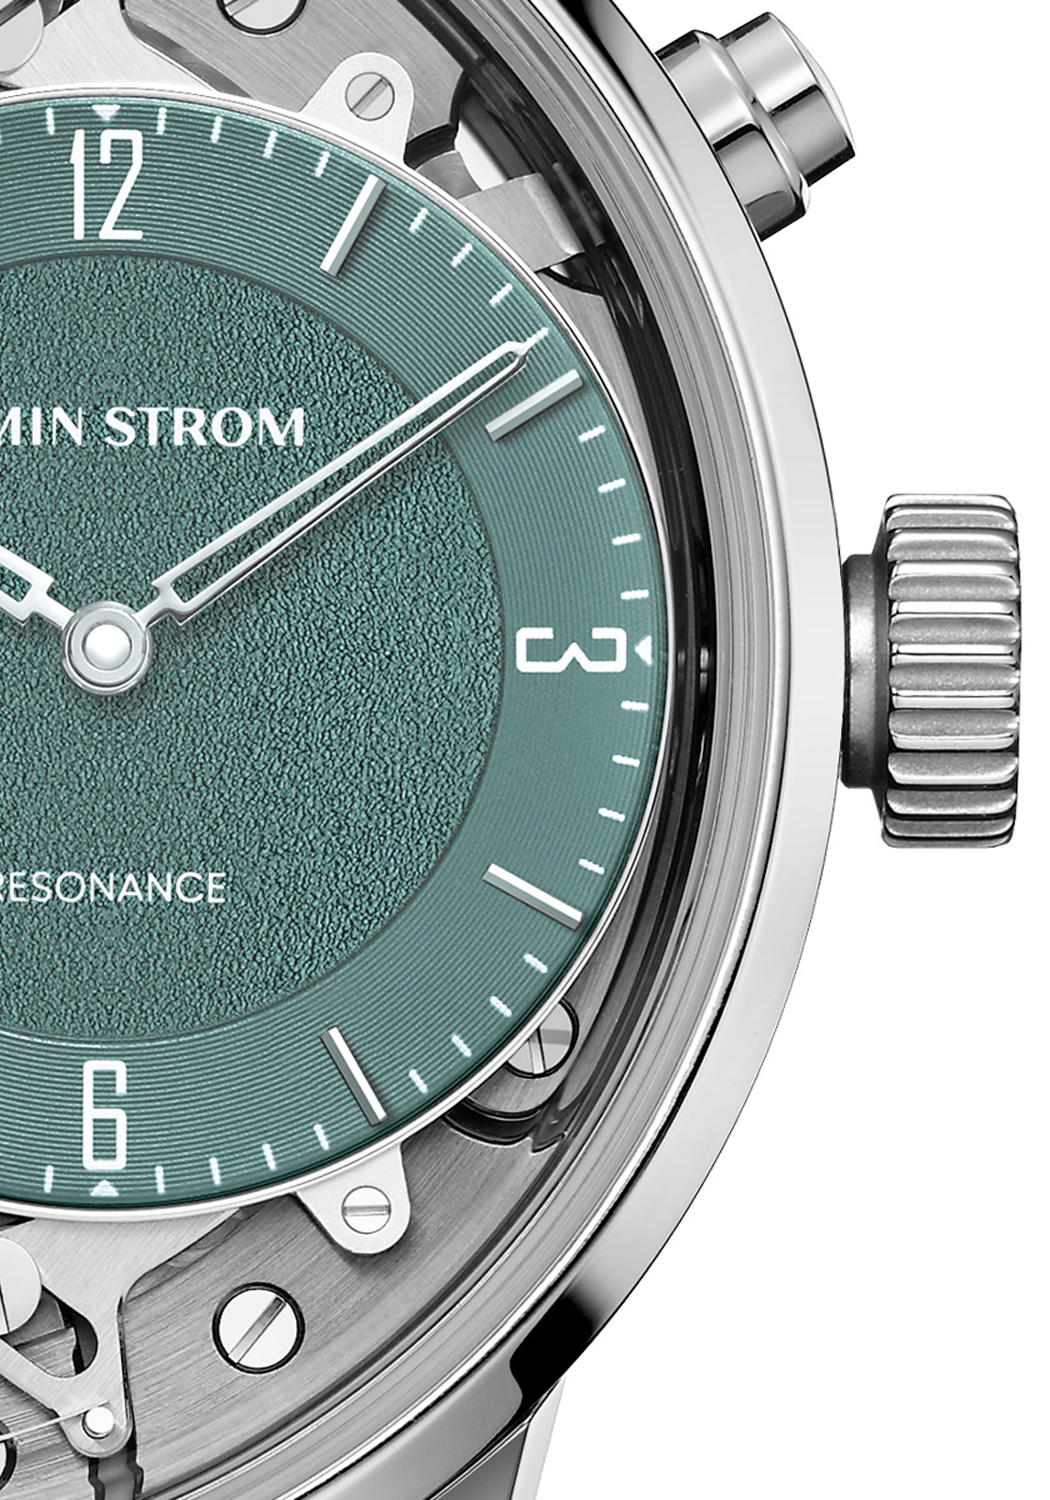 Armin Strom Mirrored Force Resonance Manufacture Green Edition | Ref. ST22-RF.20 | OsterJewelers.com